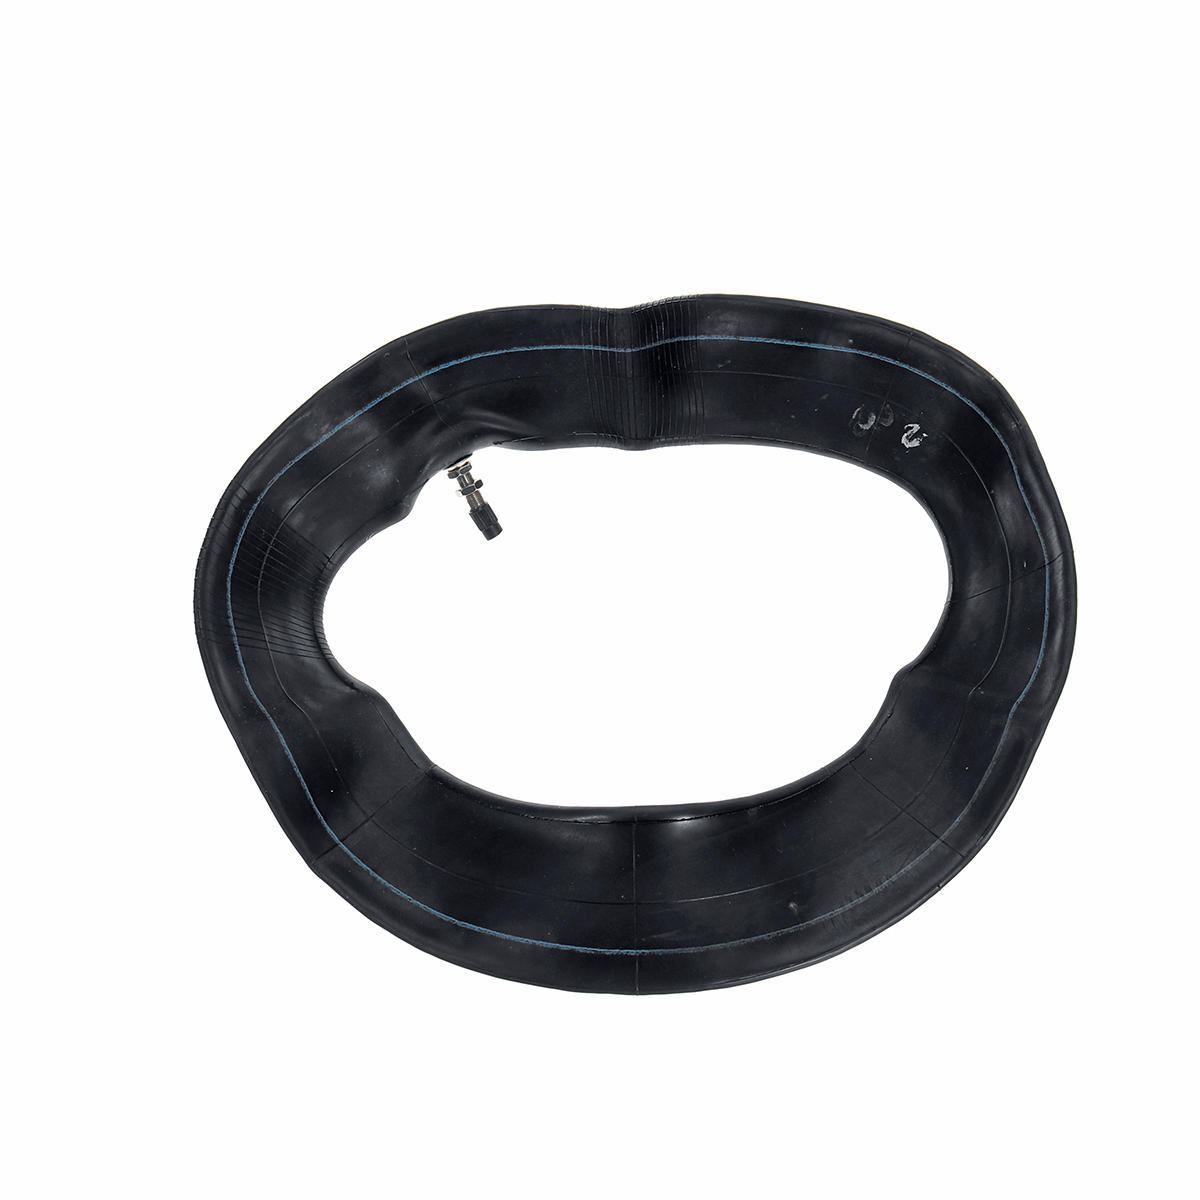 2.50-10 Inner Tube For Yamaha PW50 TTR50/Honda CRF50 XR50 Dirt Bike Front Rear 10 inch Motorcycle AT